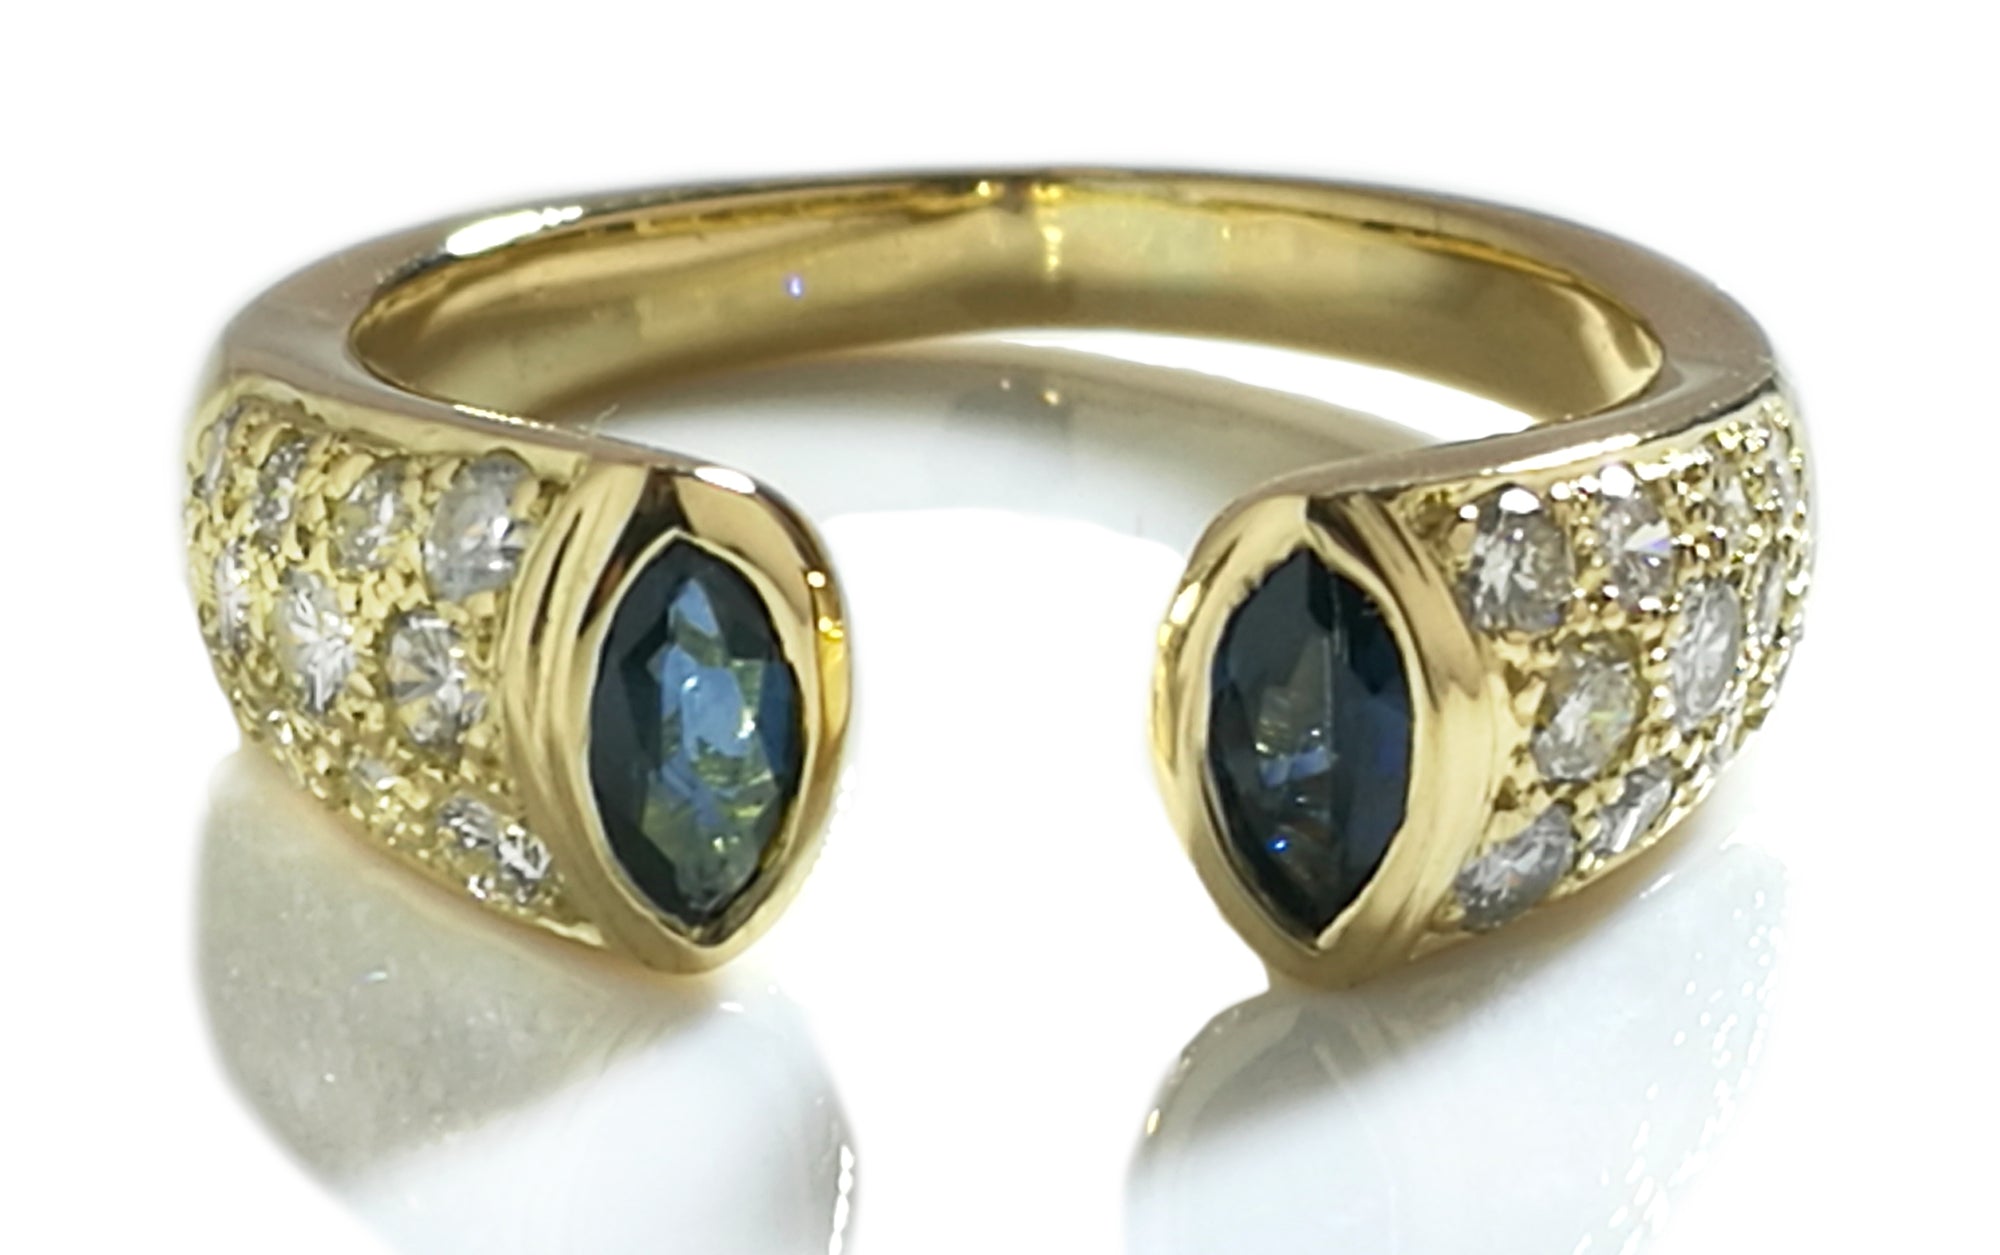 Vintage 90s French Sapphire, Diamond & 18k Yellow Gold Pave Open Front Ring, Sz M/53